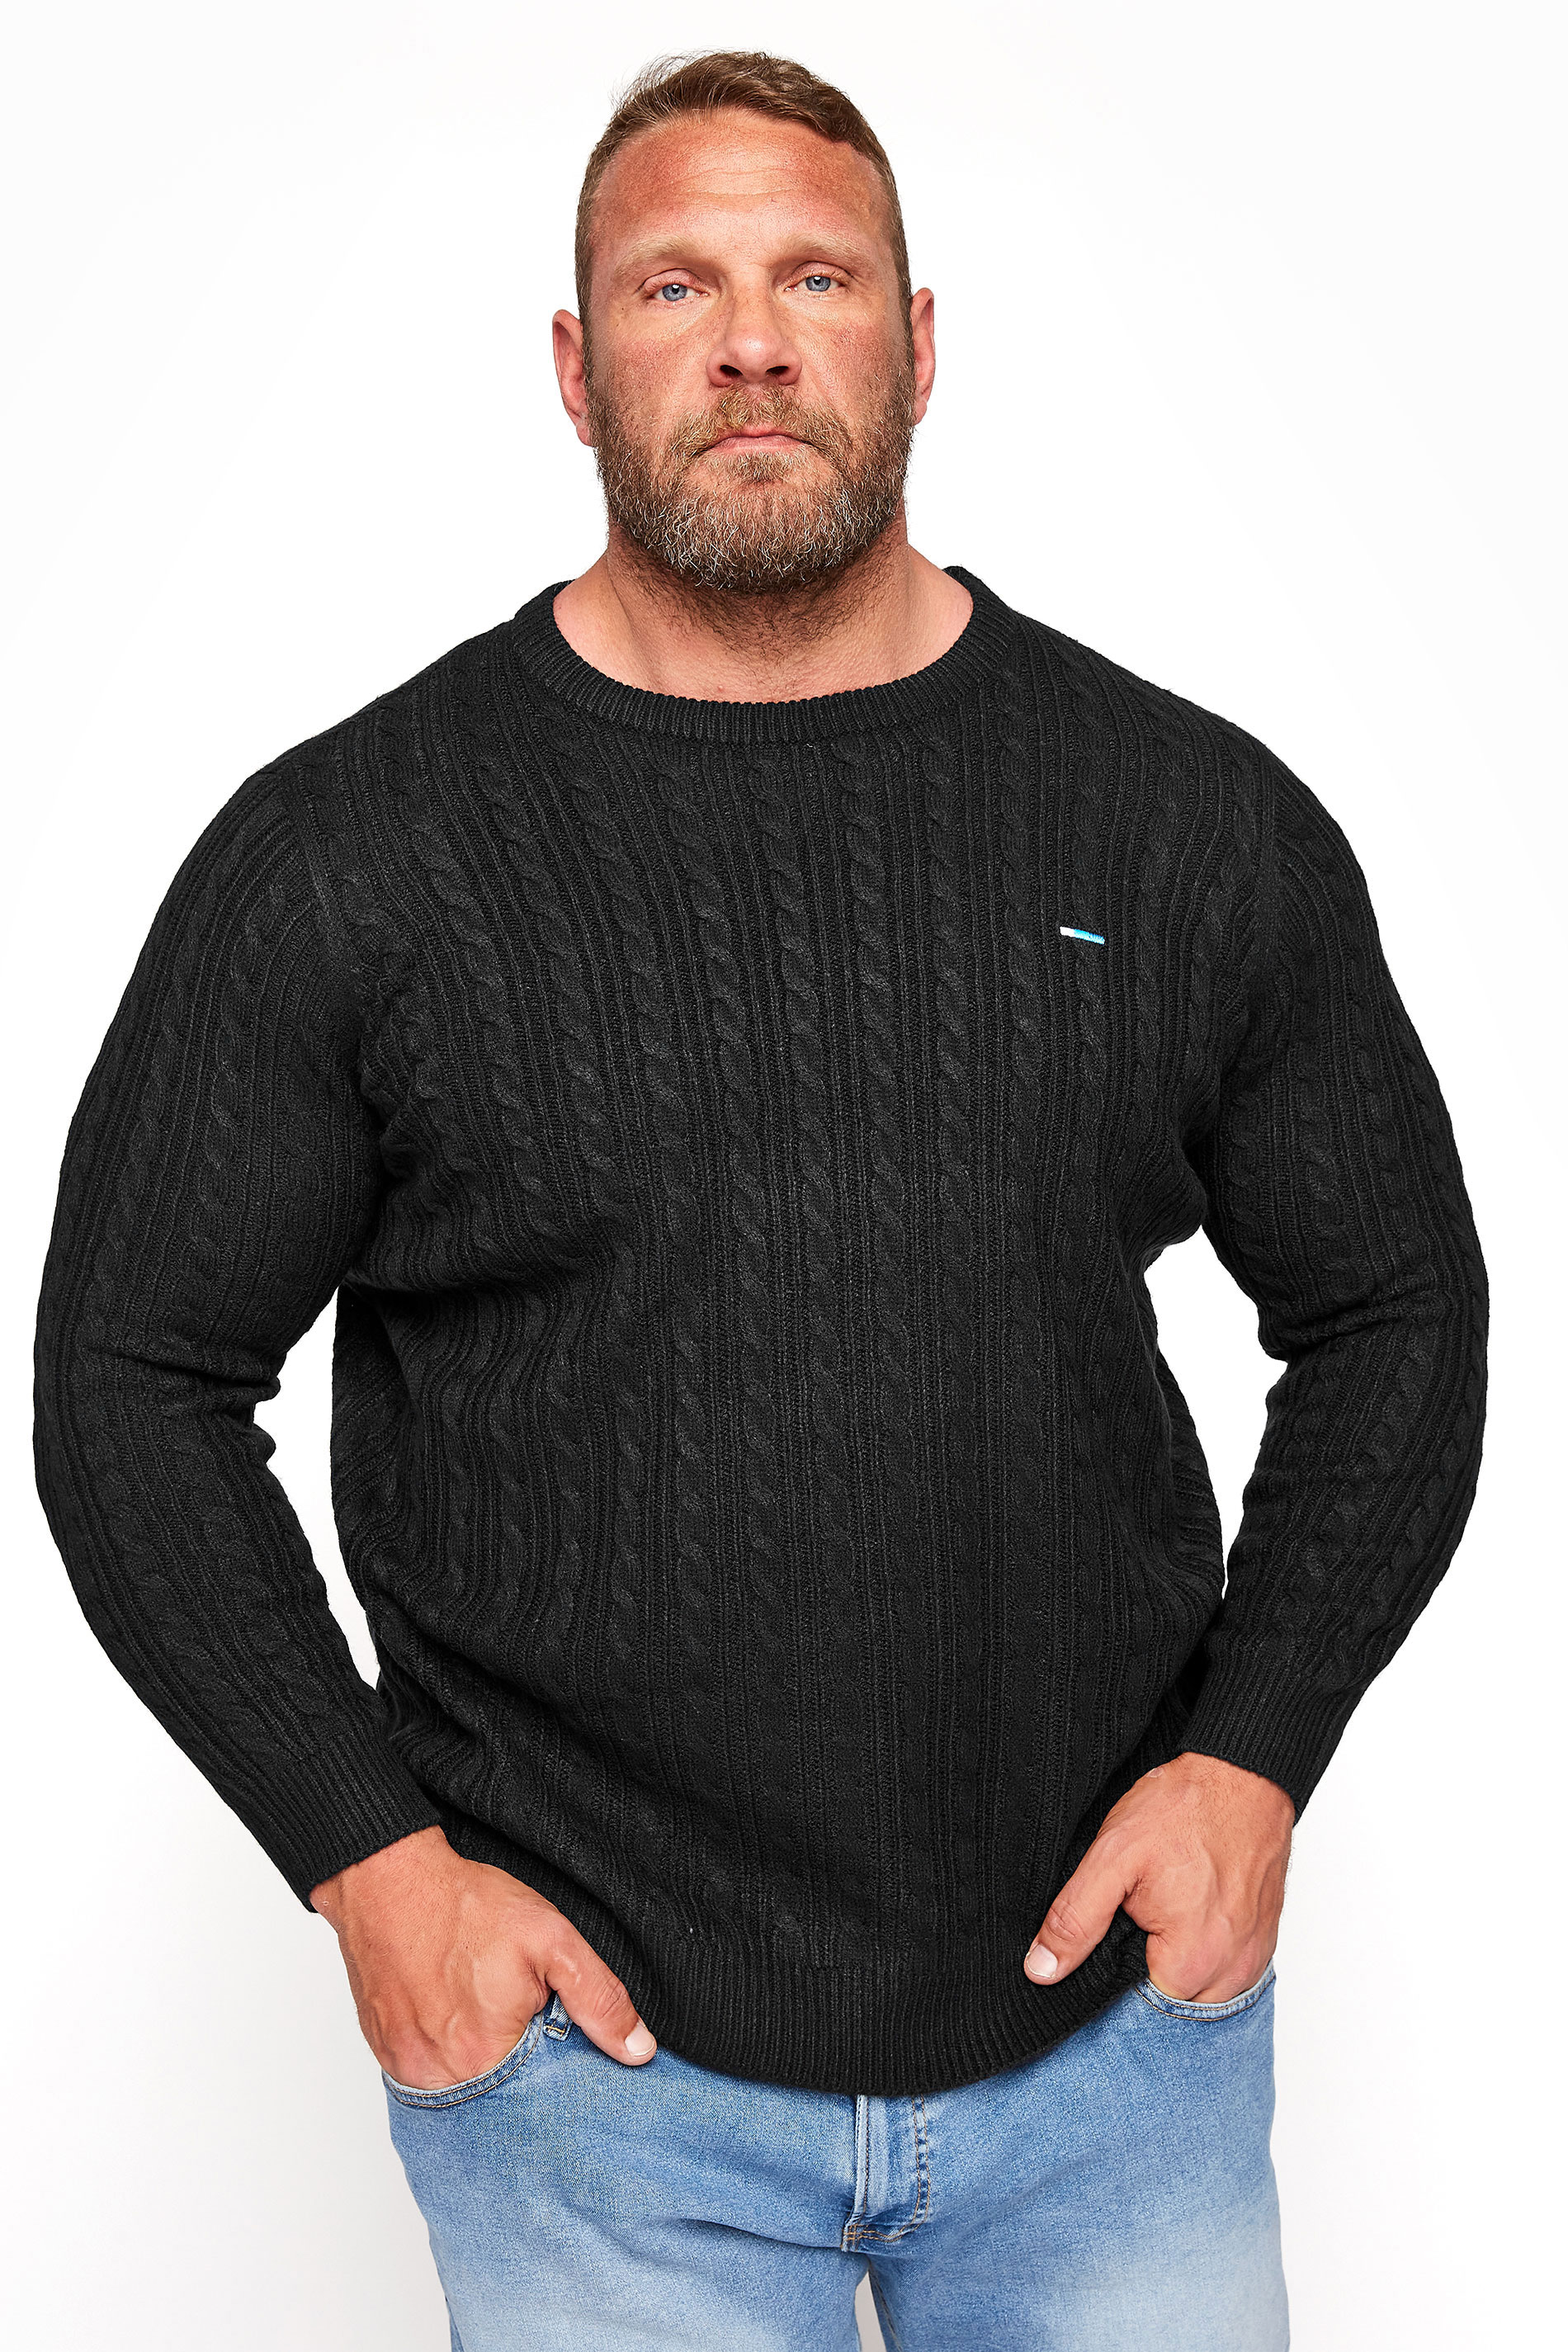 BadRhino Black Essential Cable Knitted Jumper_M.jpg